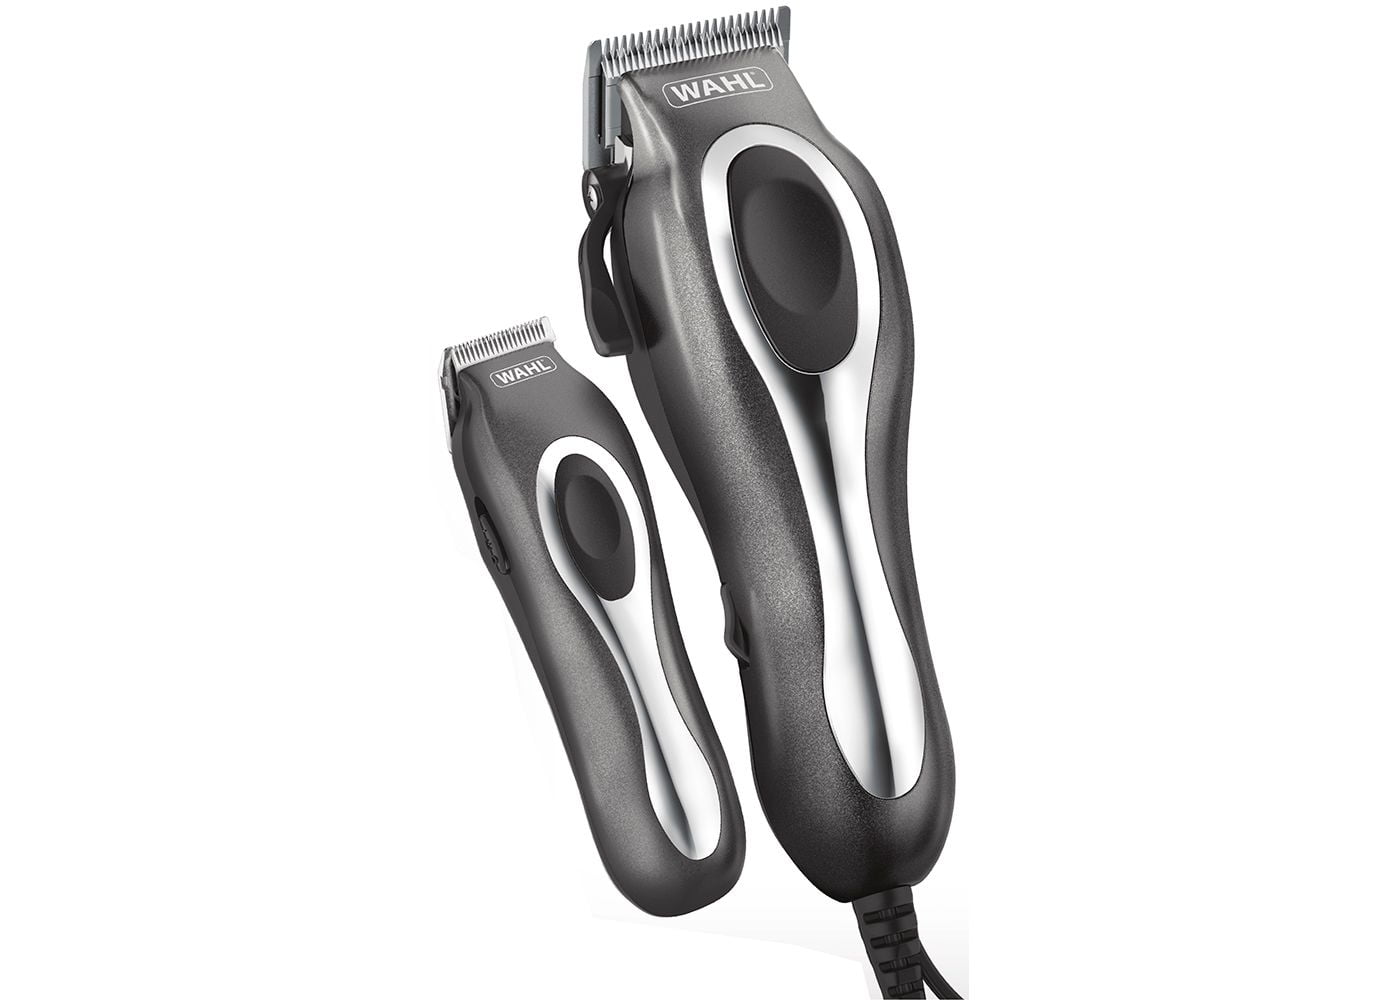 Wahl Deluxe Chrome Pro Complete Men's Haircut Trimmer Kit with Storage Case, Male, -79650-1301